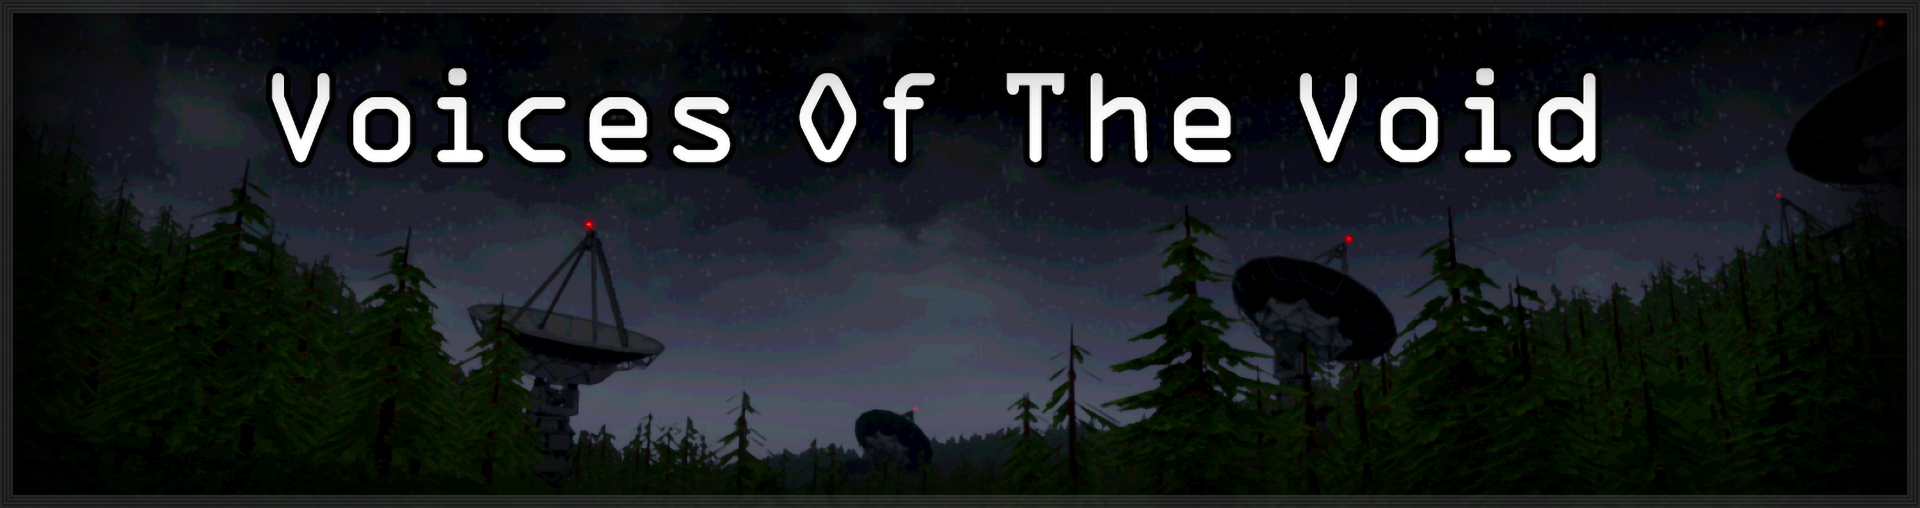 Voices of the Void игра. Voices of the Void карта. Voices of the Void логотип. Voices of the Void 3. Карта спутников voices of the void